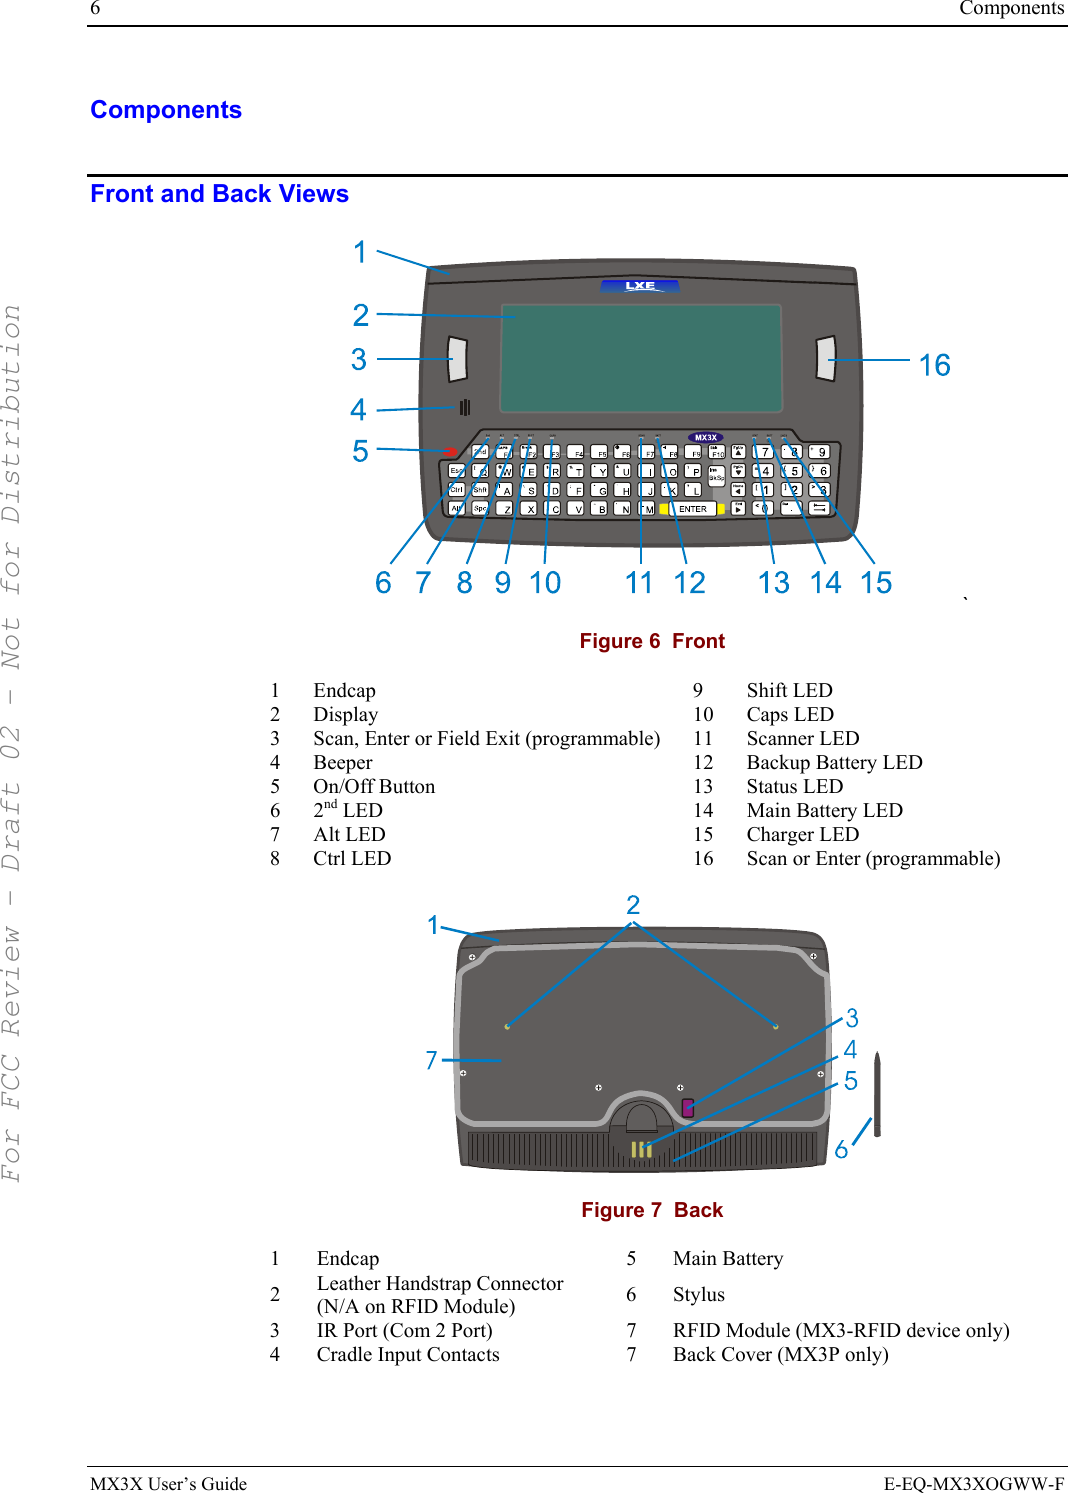 6  Components MX3X User’s Guide  E-EQ-MX3XOGWW-F Components Front and Back Views ` Figure 6  Front 1 Endcap  9  Shift LED 2 Display  10 Caps LED 3  Scan, Enter or Field Exit (programmable)  11  Scanner LED 4 Beeper  12 Backup Battery LED 5 On/Off Button  13 Status LED 6 2nd LED  14  Main Battery LED 7 Alt LED  15 Charger LED 8 Ctrl LED  16 Scan or Enter (programmable)  Figure 7  Back 1 Endcap  5 Main Battery 2  Leather Handstrap Connector (N/A on RFID Module)  6 Stylus 3  IR Port (Com 2 Port)  7  RFID Module (MX3-RFID device only) 4  Cradle Input Contacts  7  Back Cover (MX3P only)  For FCC Review - Draft 02 - Not for Distribution